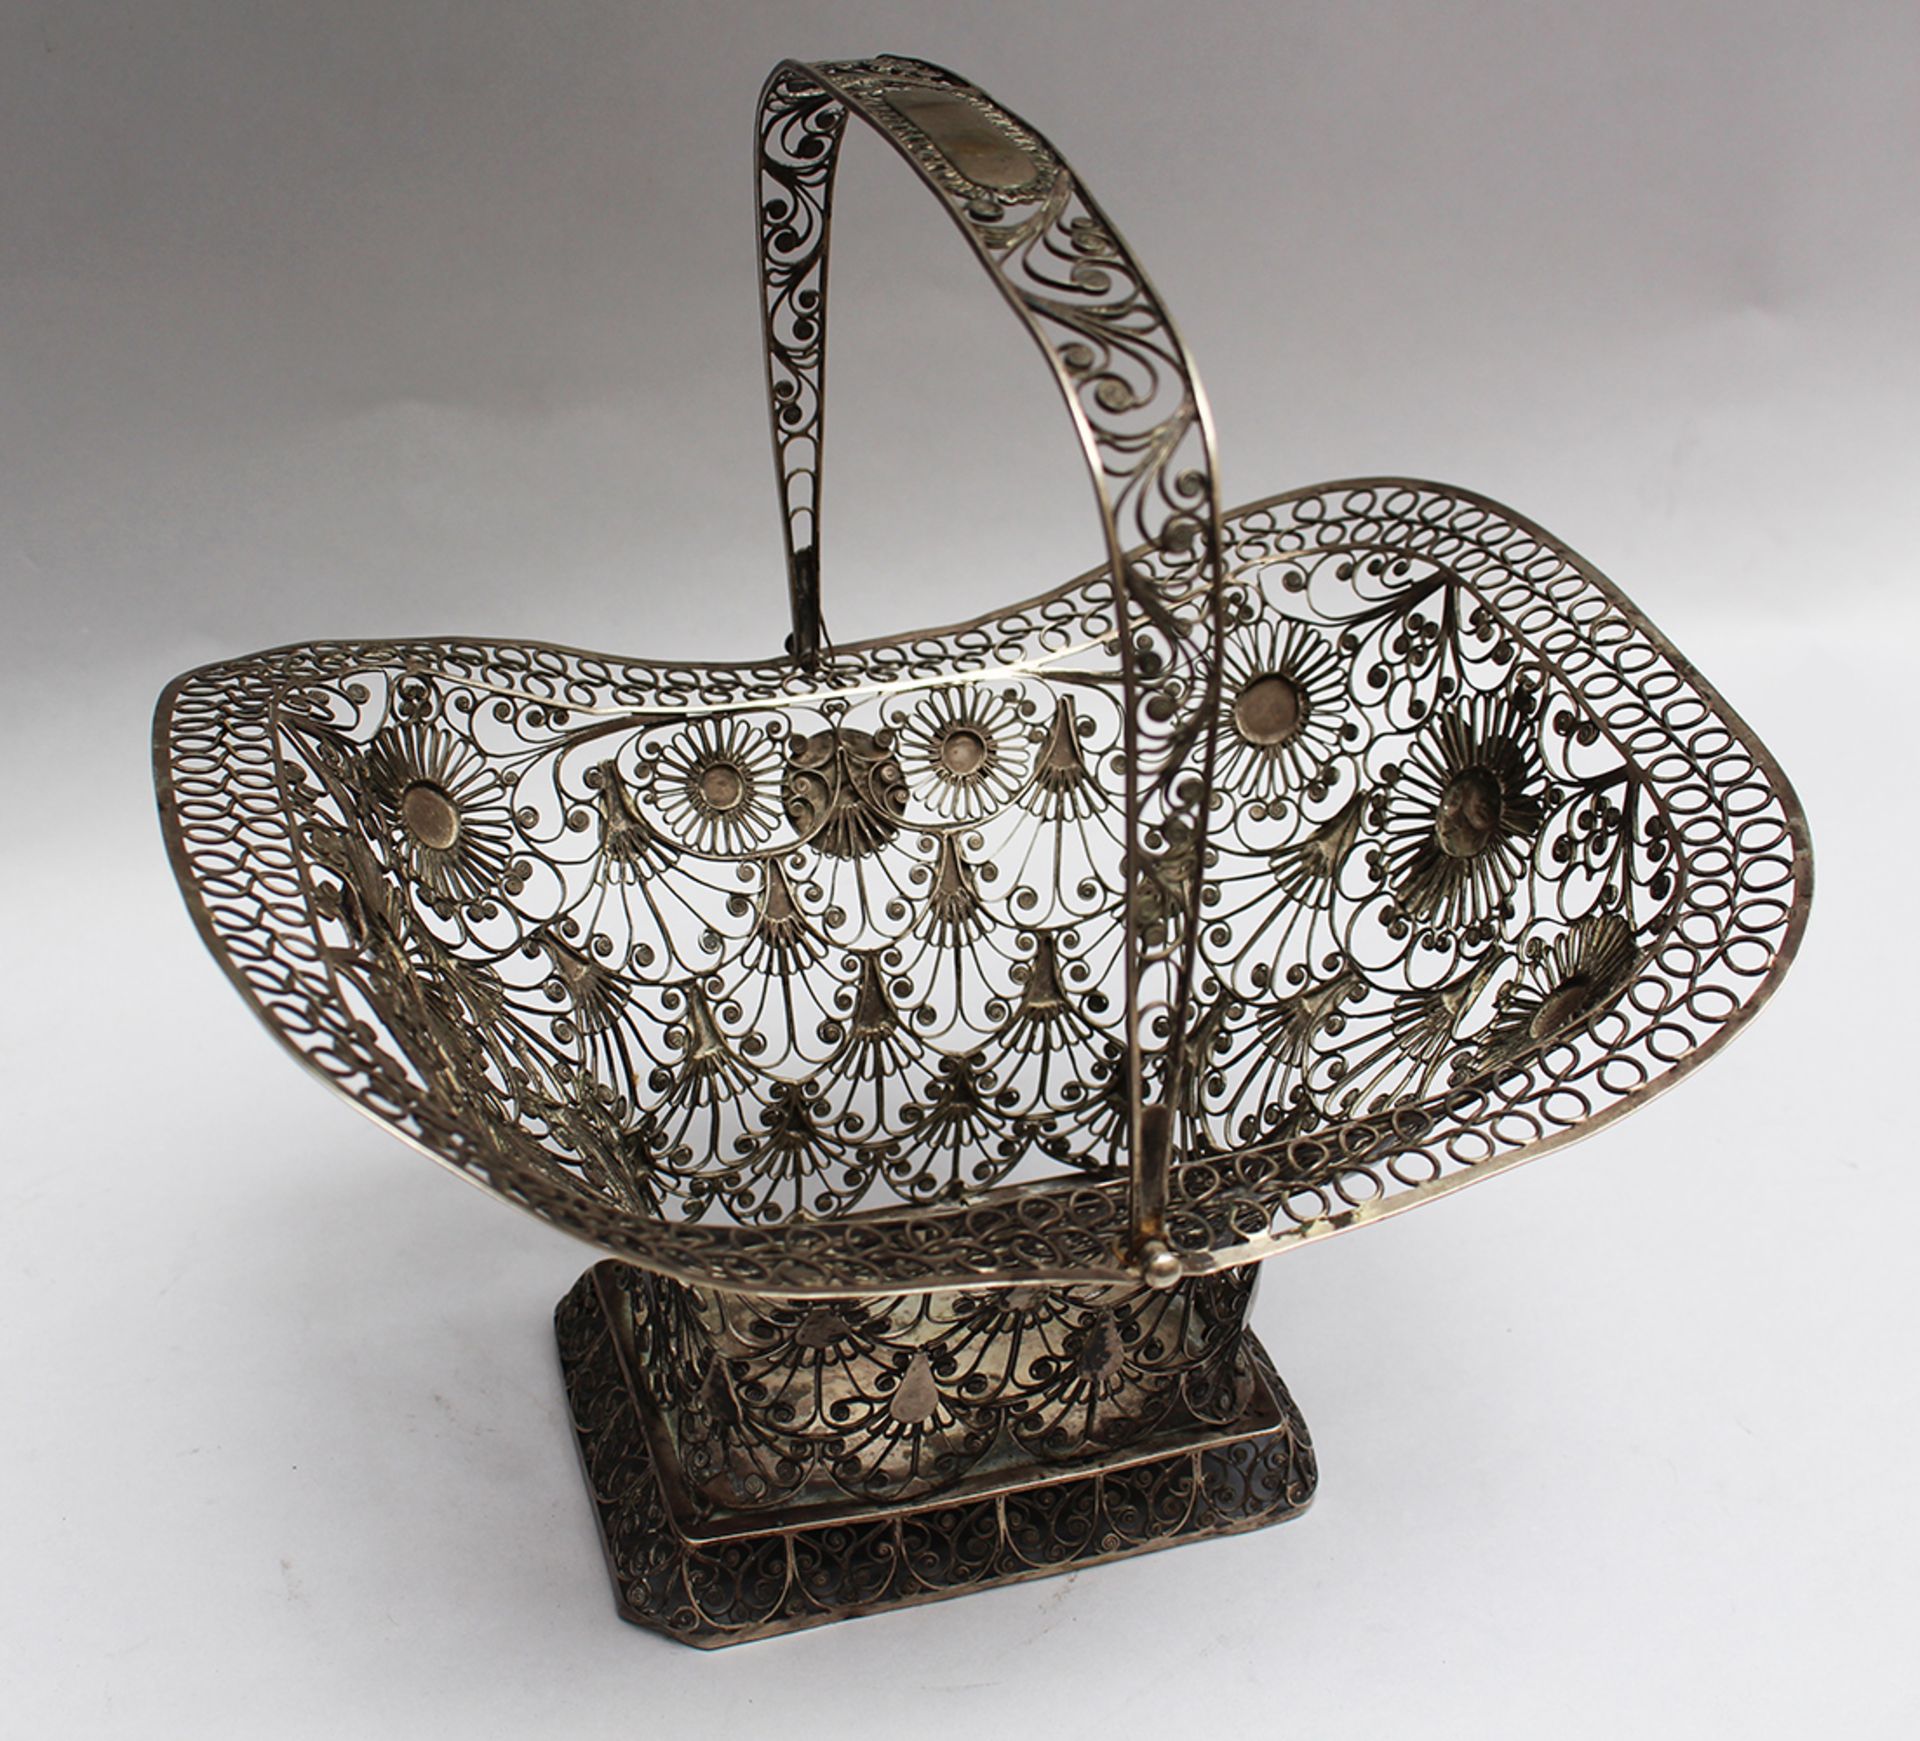 Silver basket with handle; master signed P.F.V.?, 19th Century; 430g. Height 24cm, width 25cm - Image 2 of 3